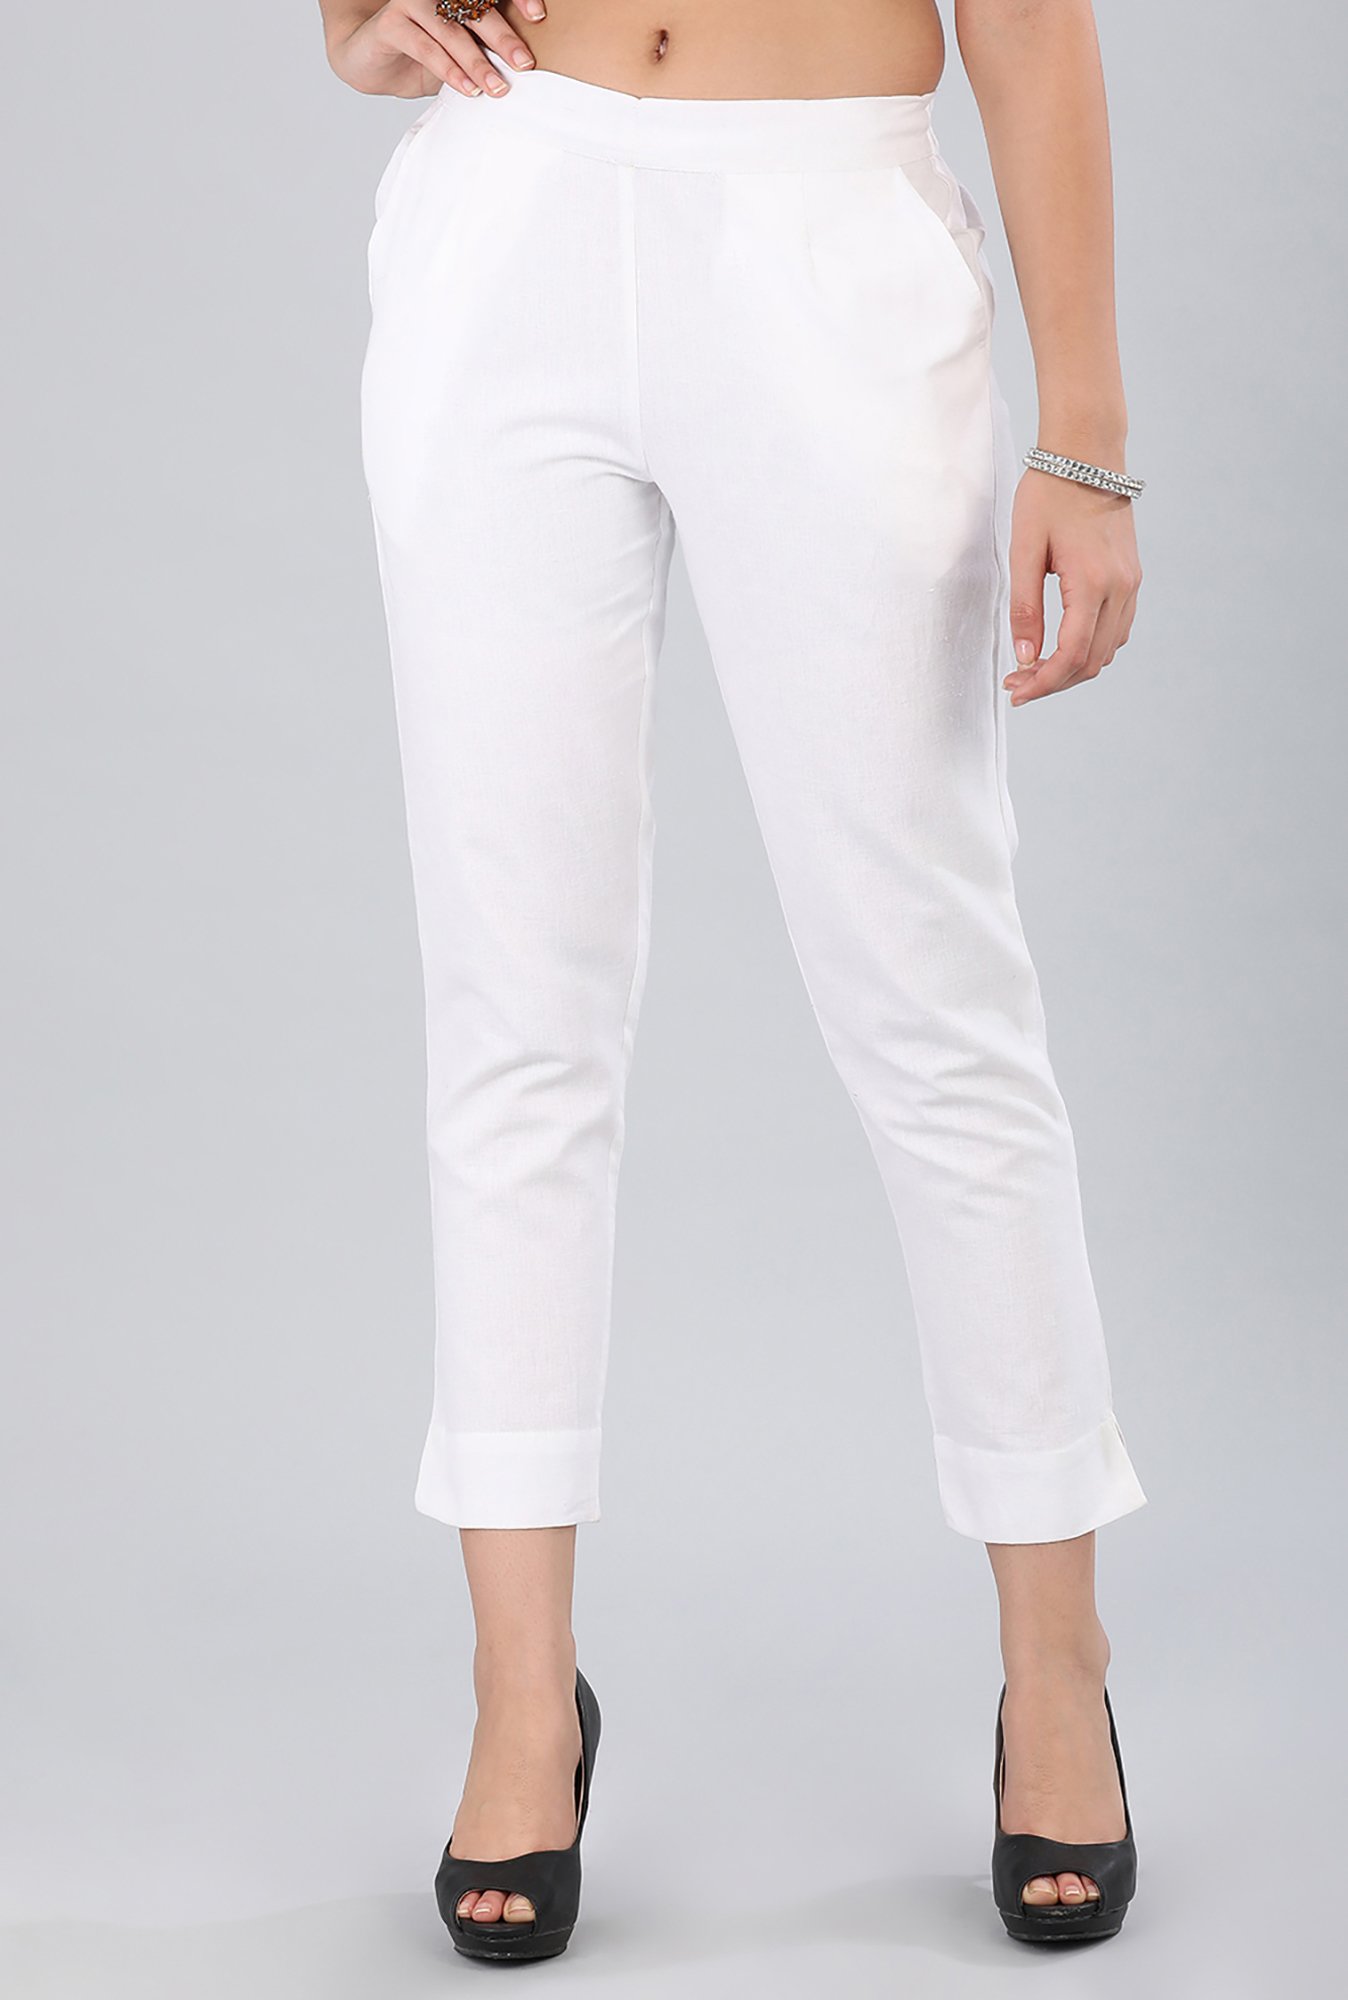 Buy White Ankle Length Trousers Online Aurelia, 43% OFF